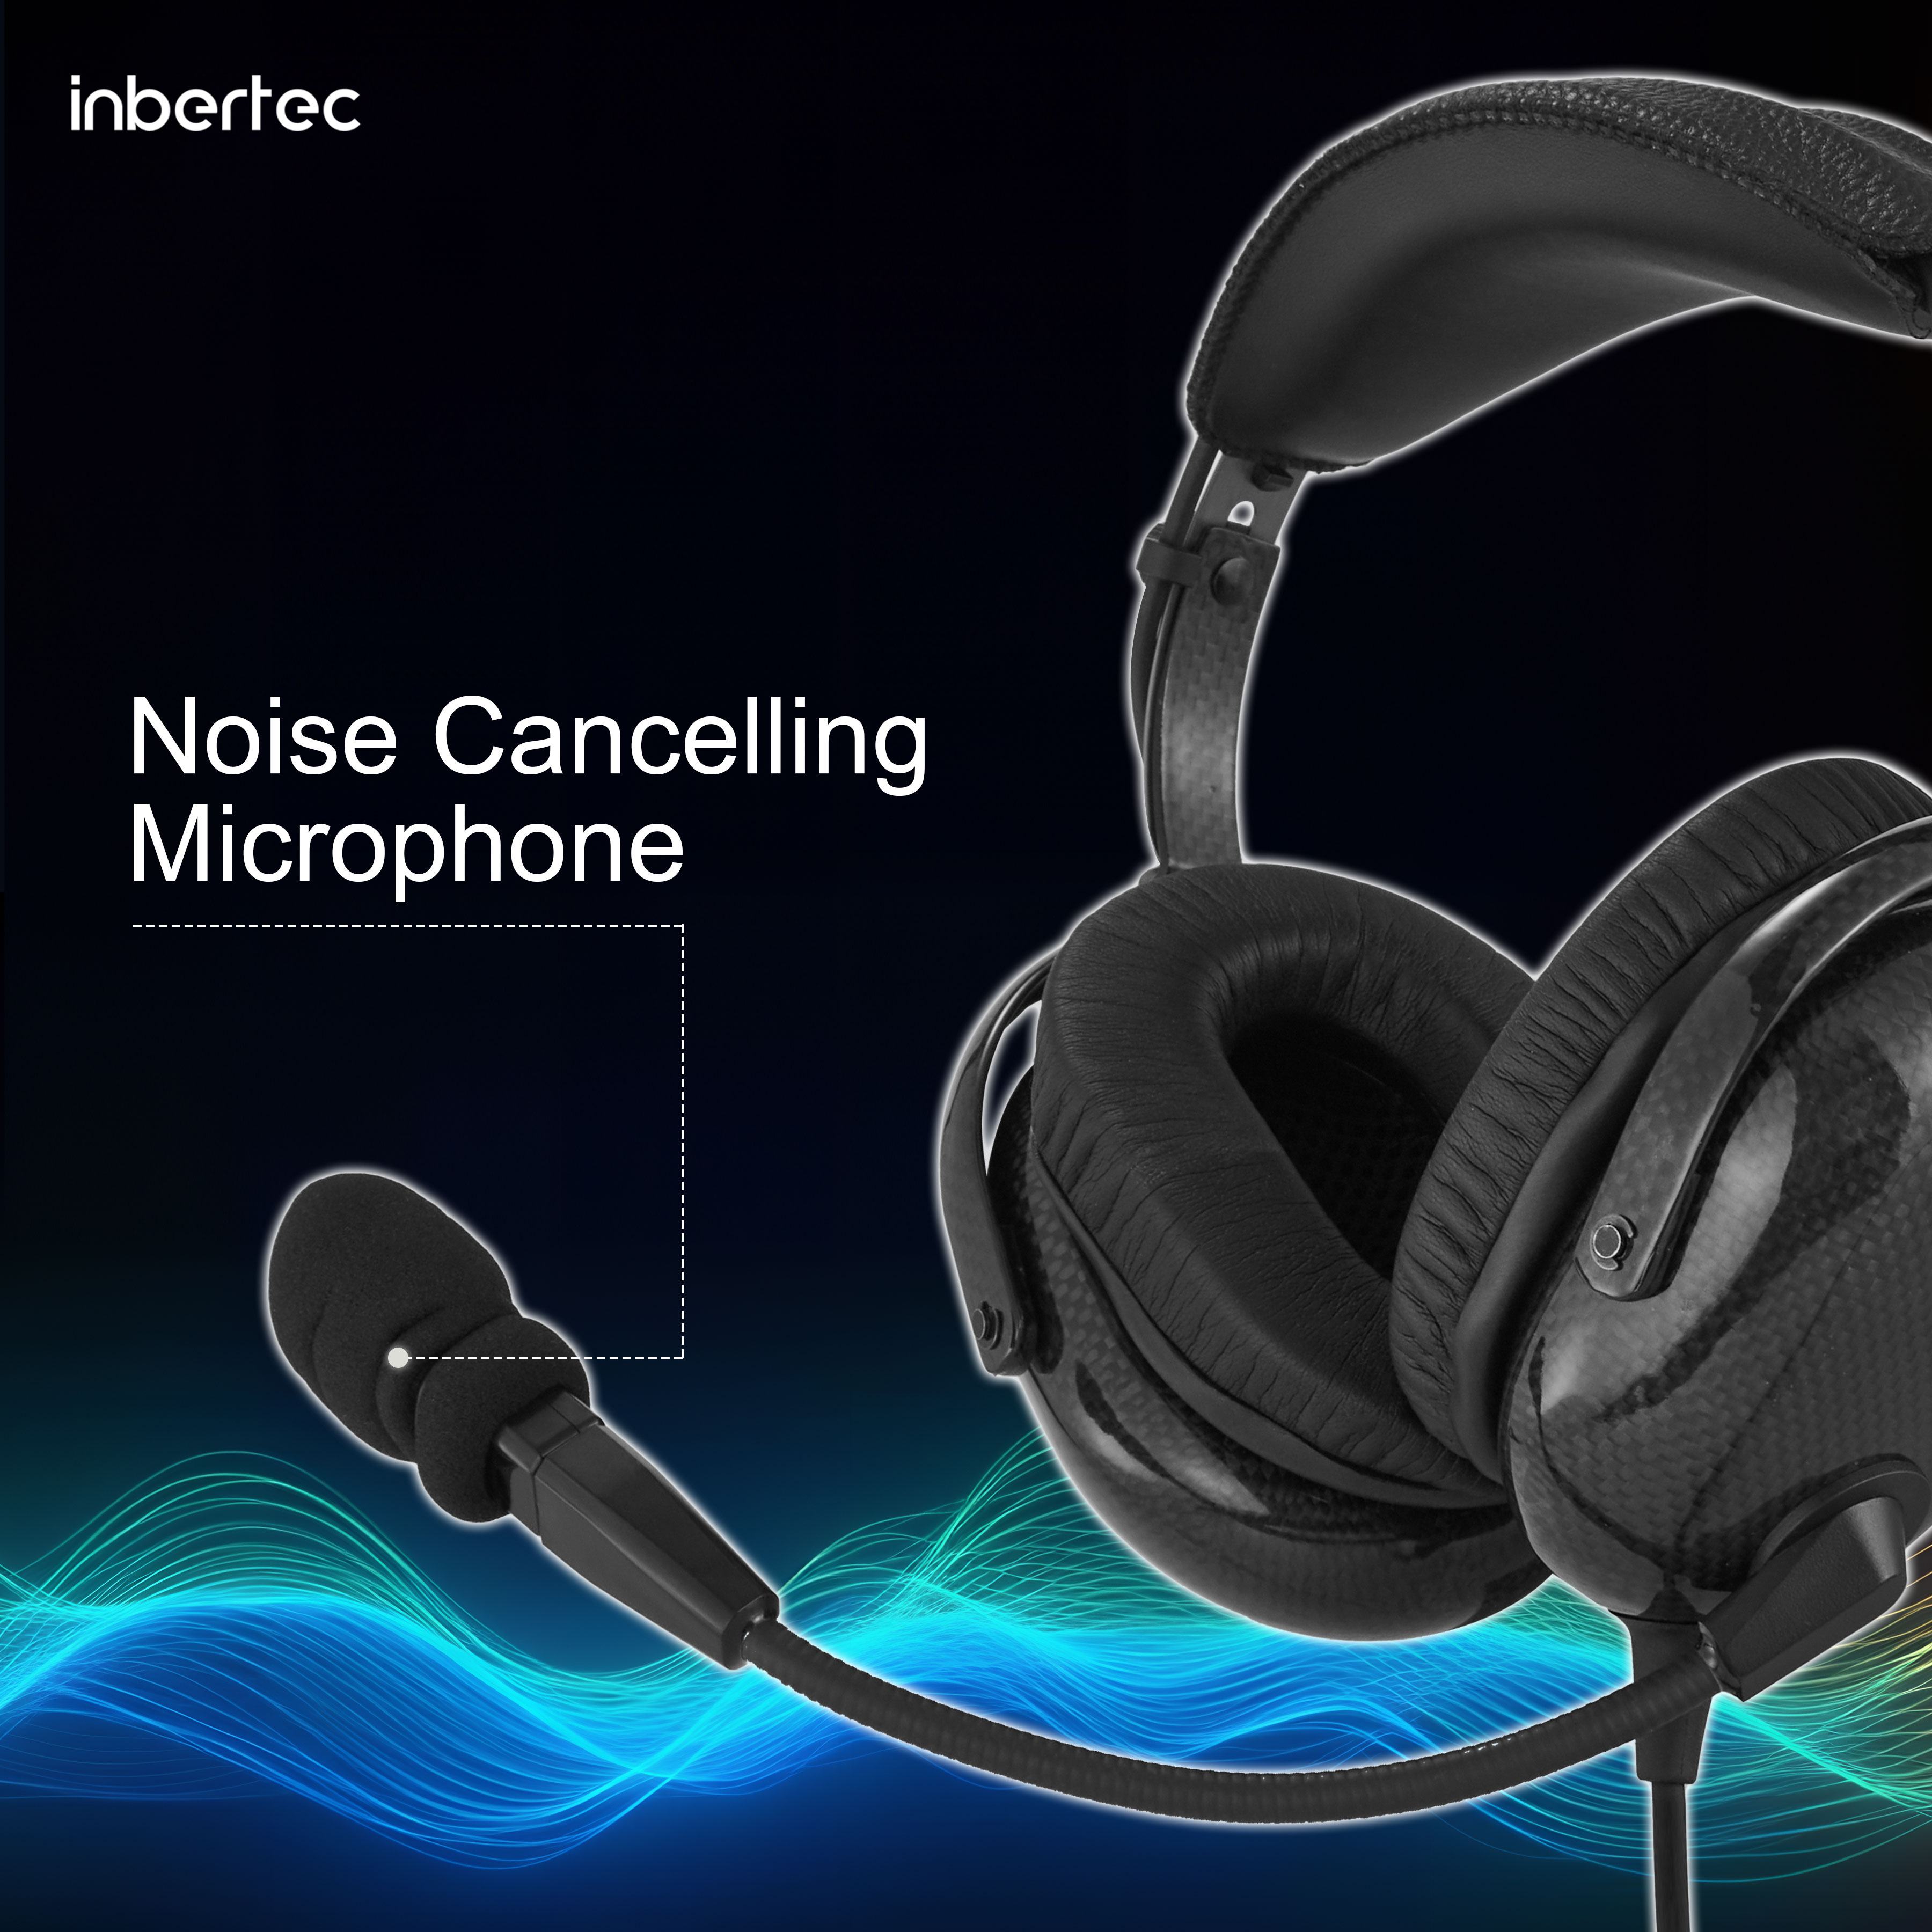 Noise cancelling microphone